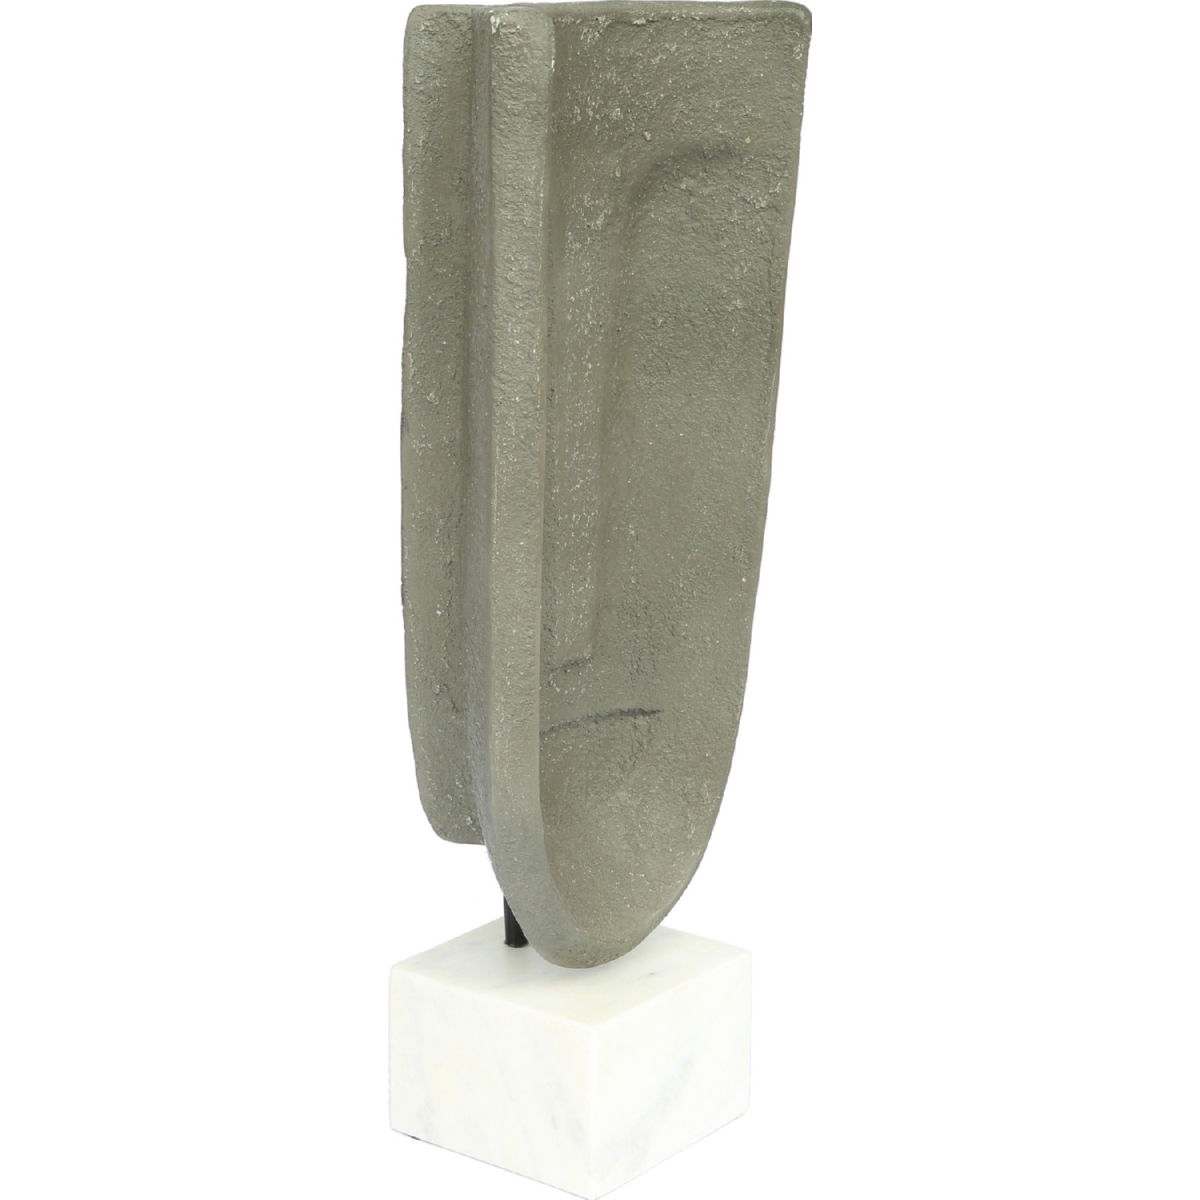 Dd-1024-29 Ecomix Abstract Face Sculpture - Light Grey, 19 X 8 X 5 In.